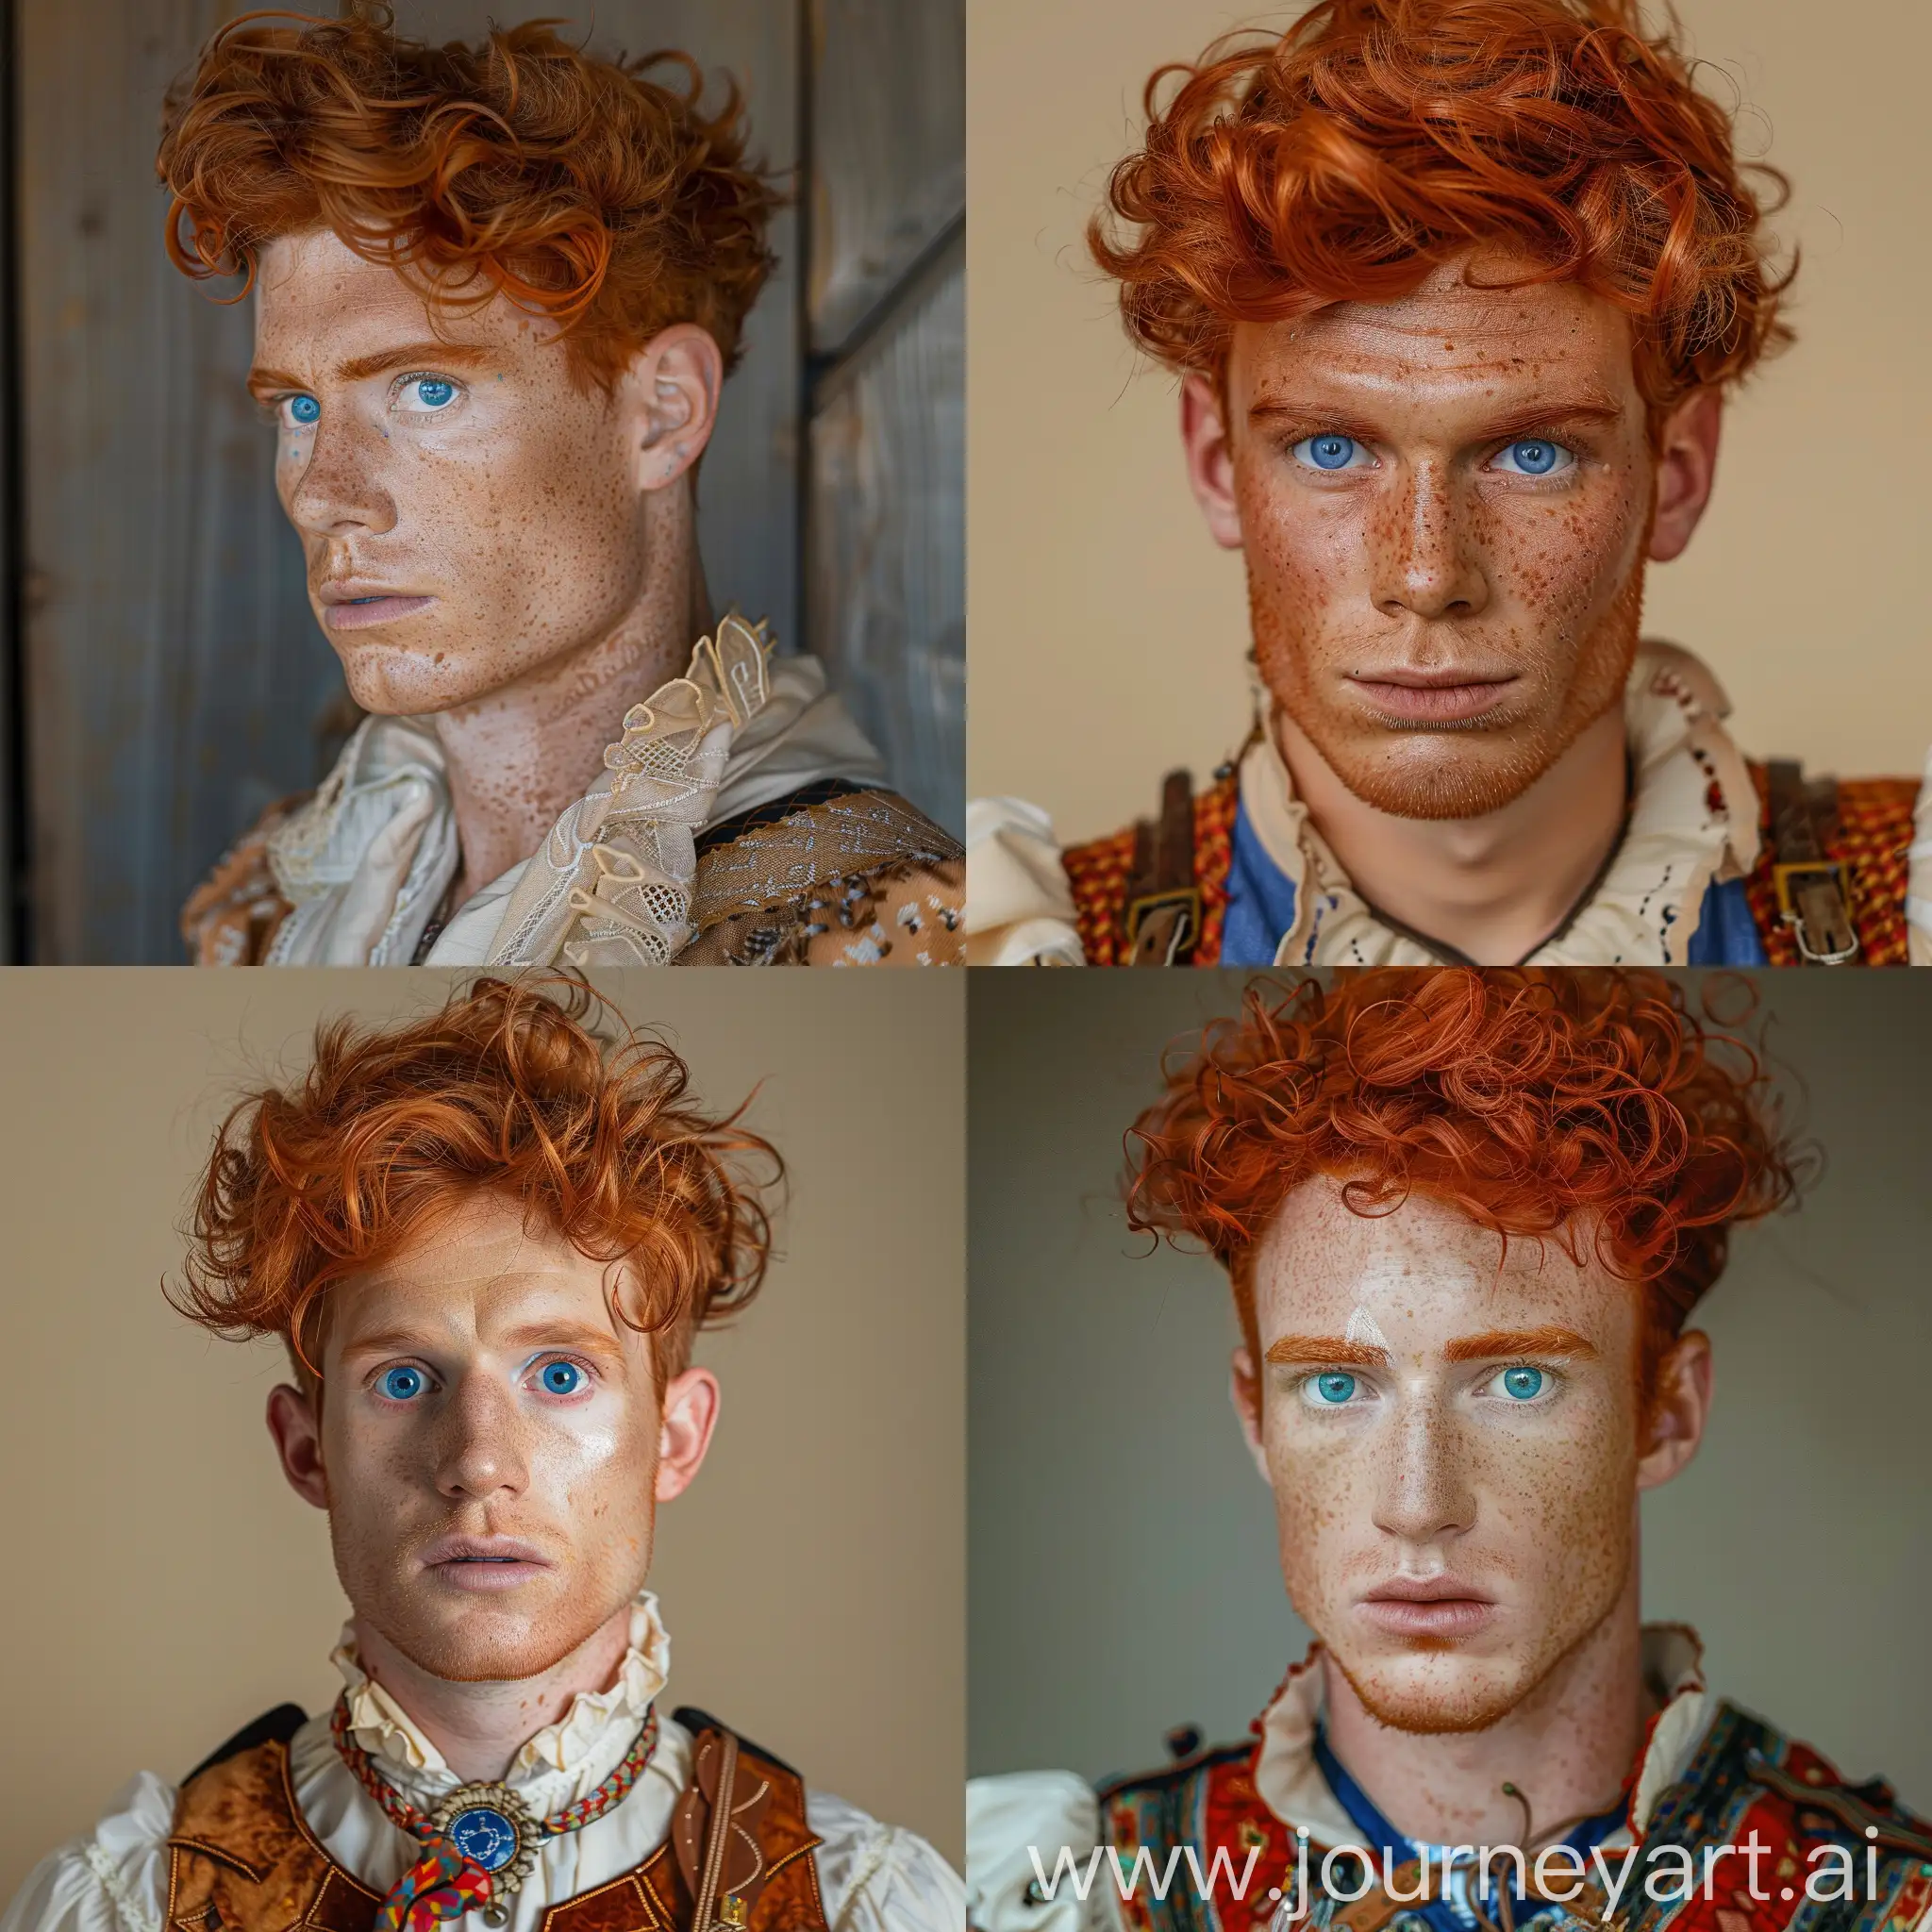 Bavarian-Man-in-Latex-Traditional-Costume-with-Striking-RustRed-Hair-and-Blue-Eyes